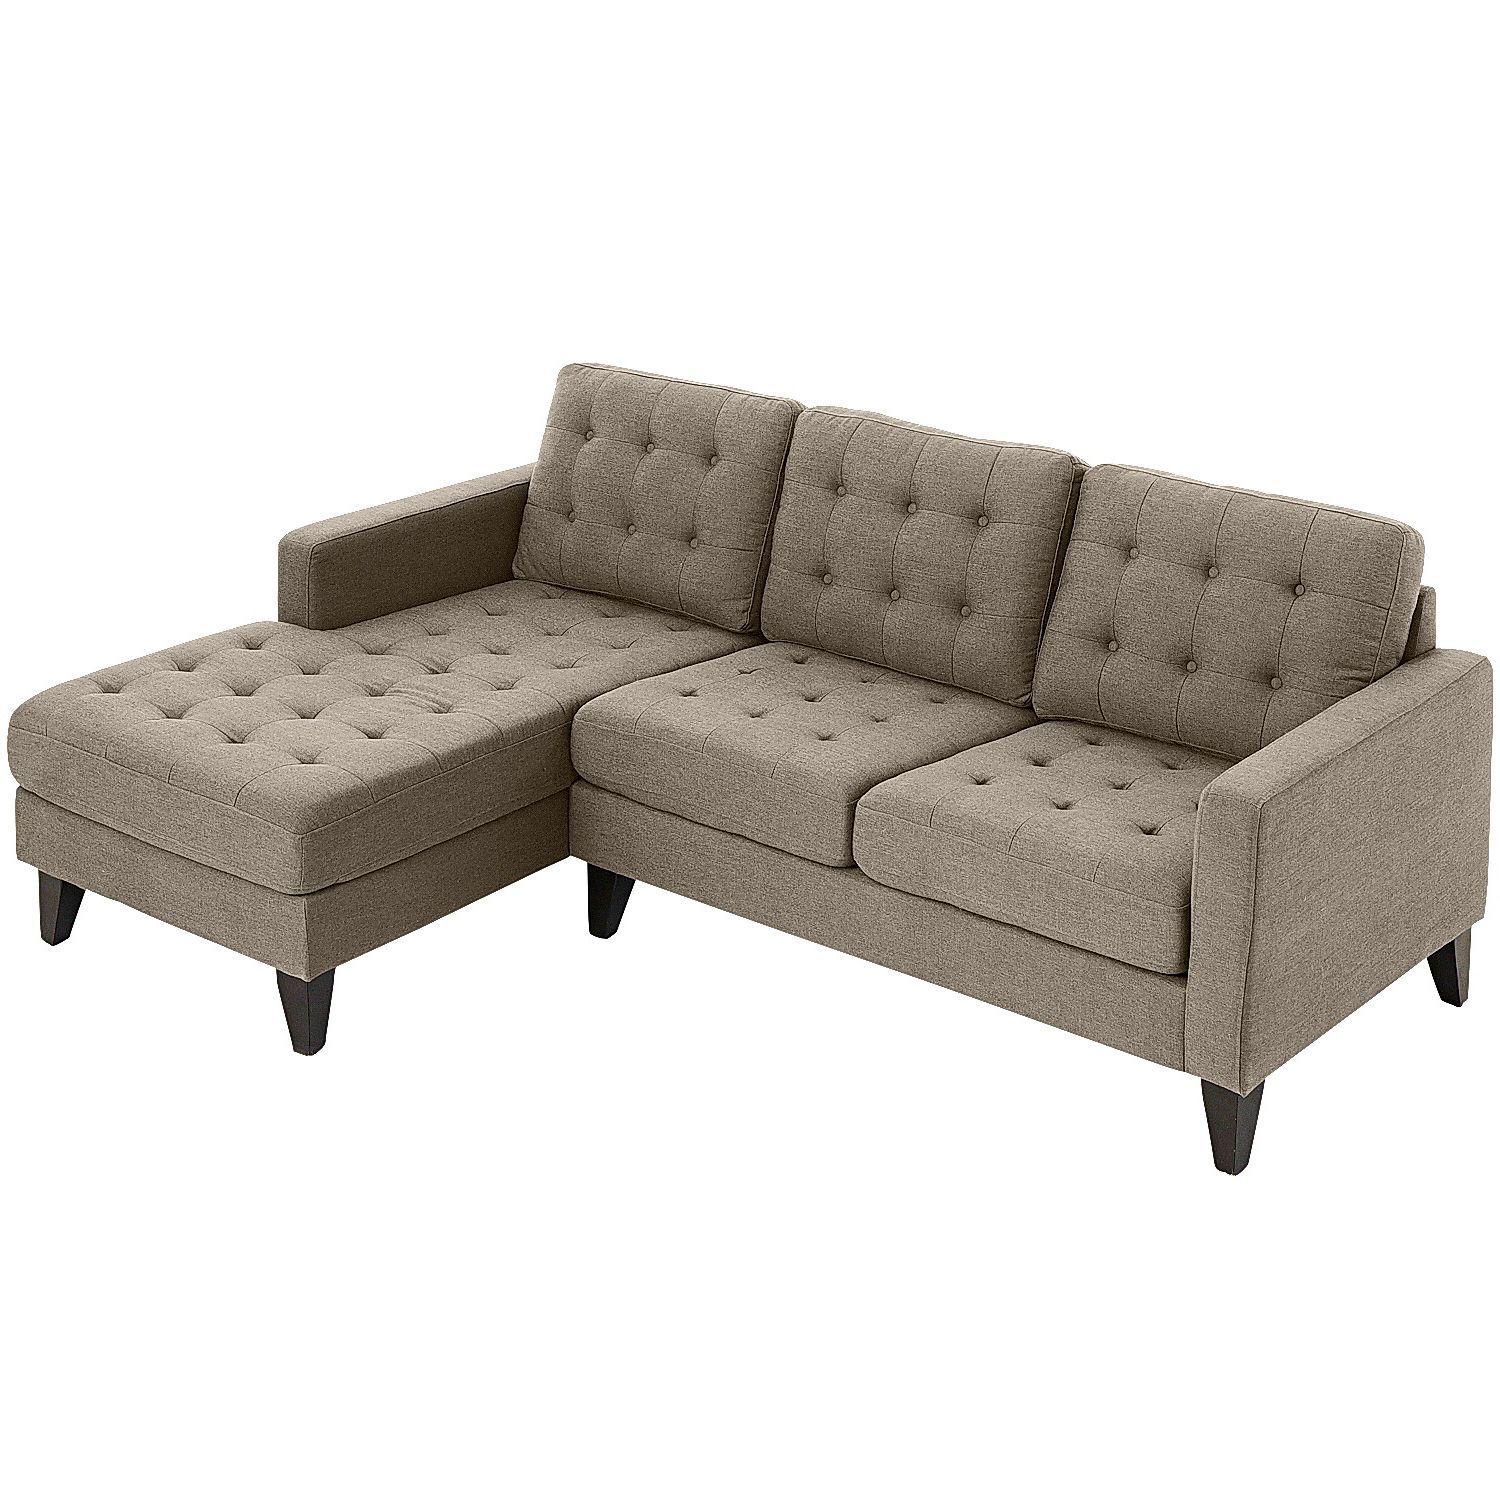 Nyle Putty 2 Piece Left Arm Chaise Sectional | Living Room In Element Left Side Chaise Sectional Sofas In Dark Gray Linen And Walnut Legs (View 5 of 15)